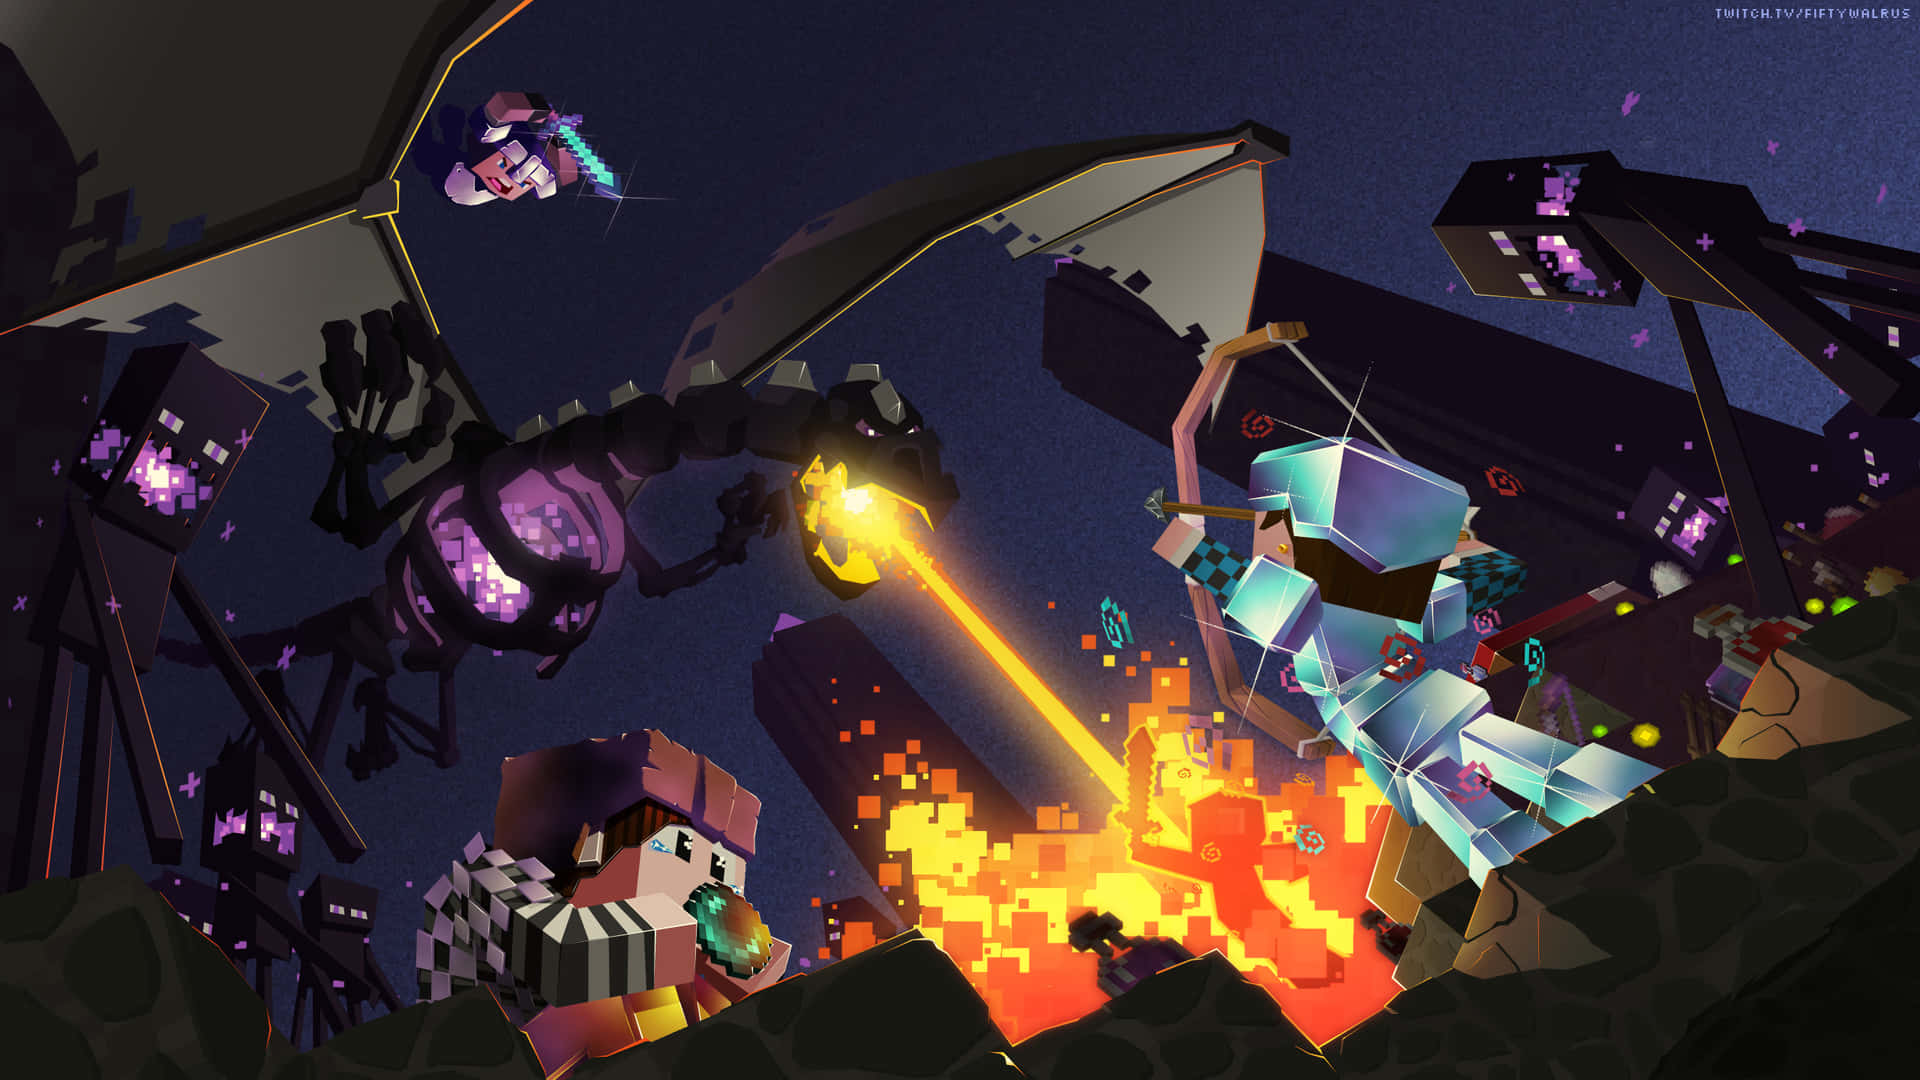 Download Heroic Battle with the Ender Dragon Wallpaper